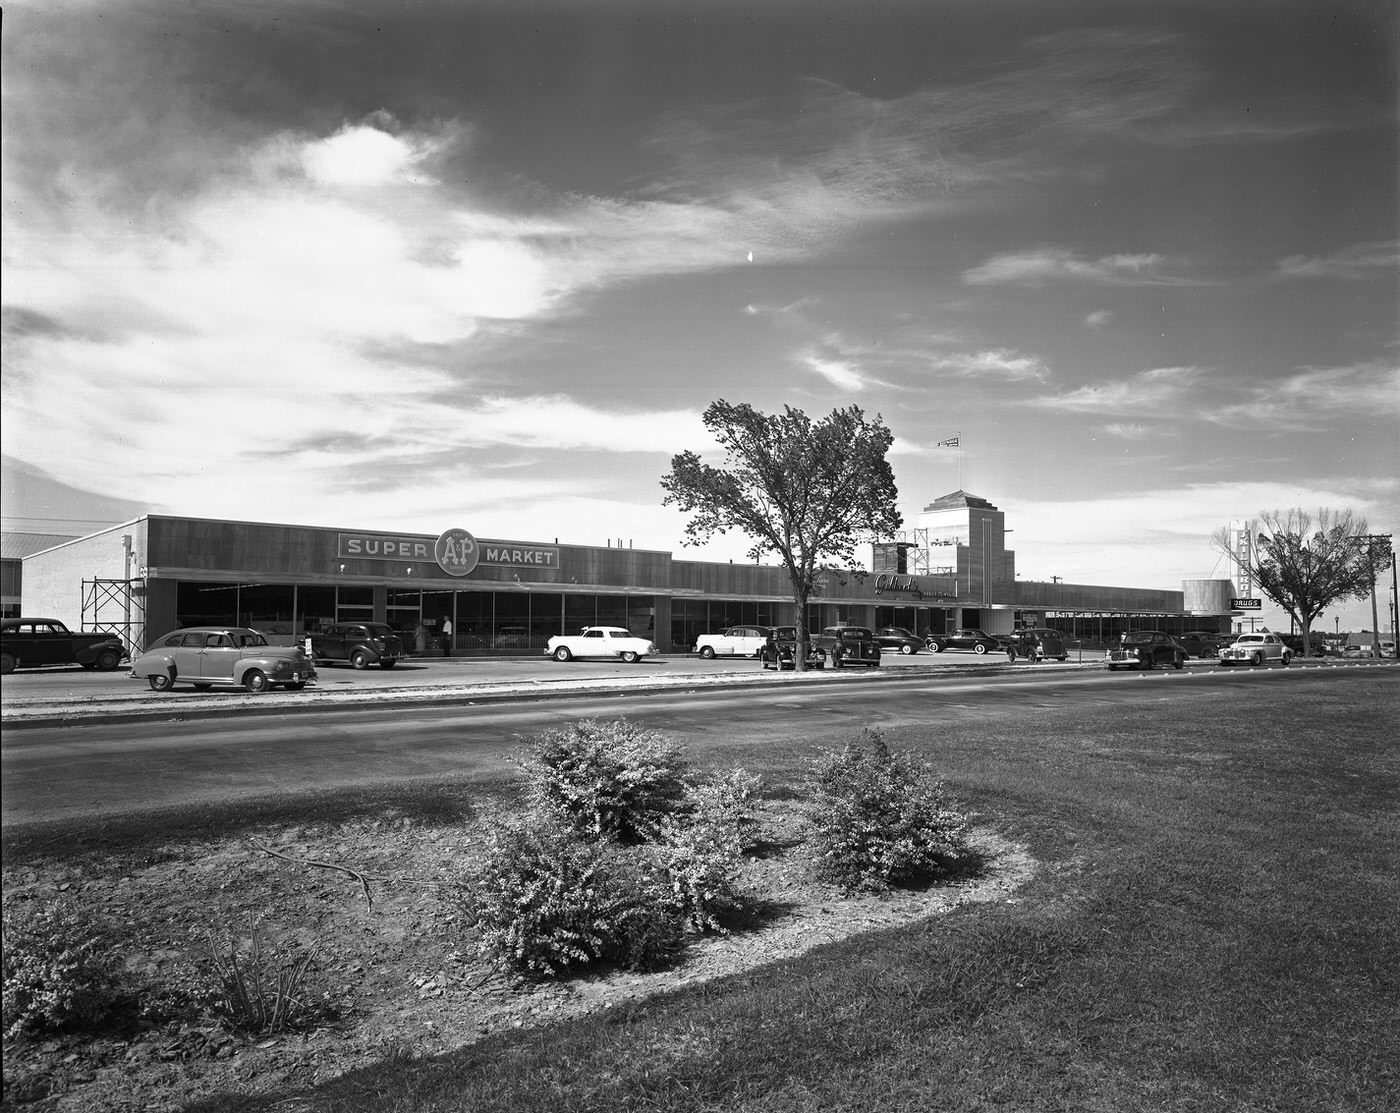 Skillern Drugs and A&P Super Market on Camp Bowie, Arlington Heights, 1949